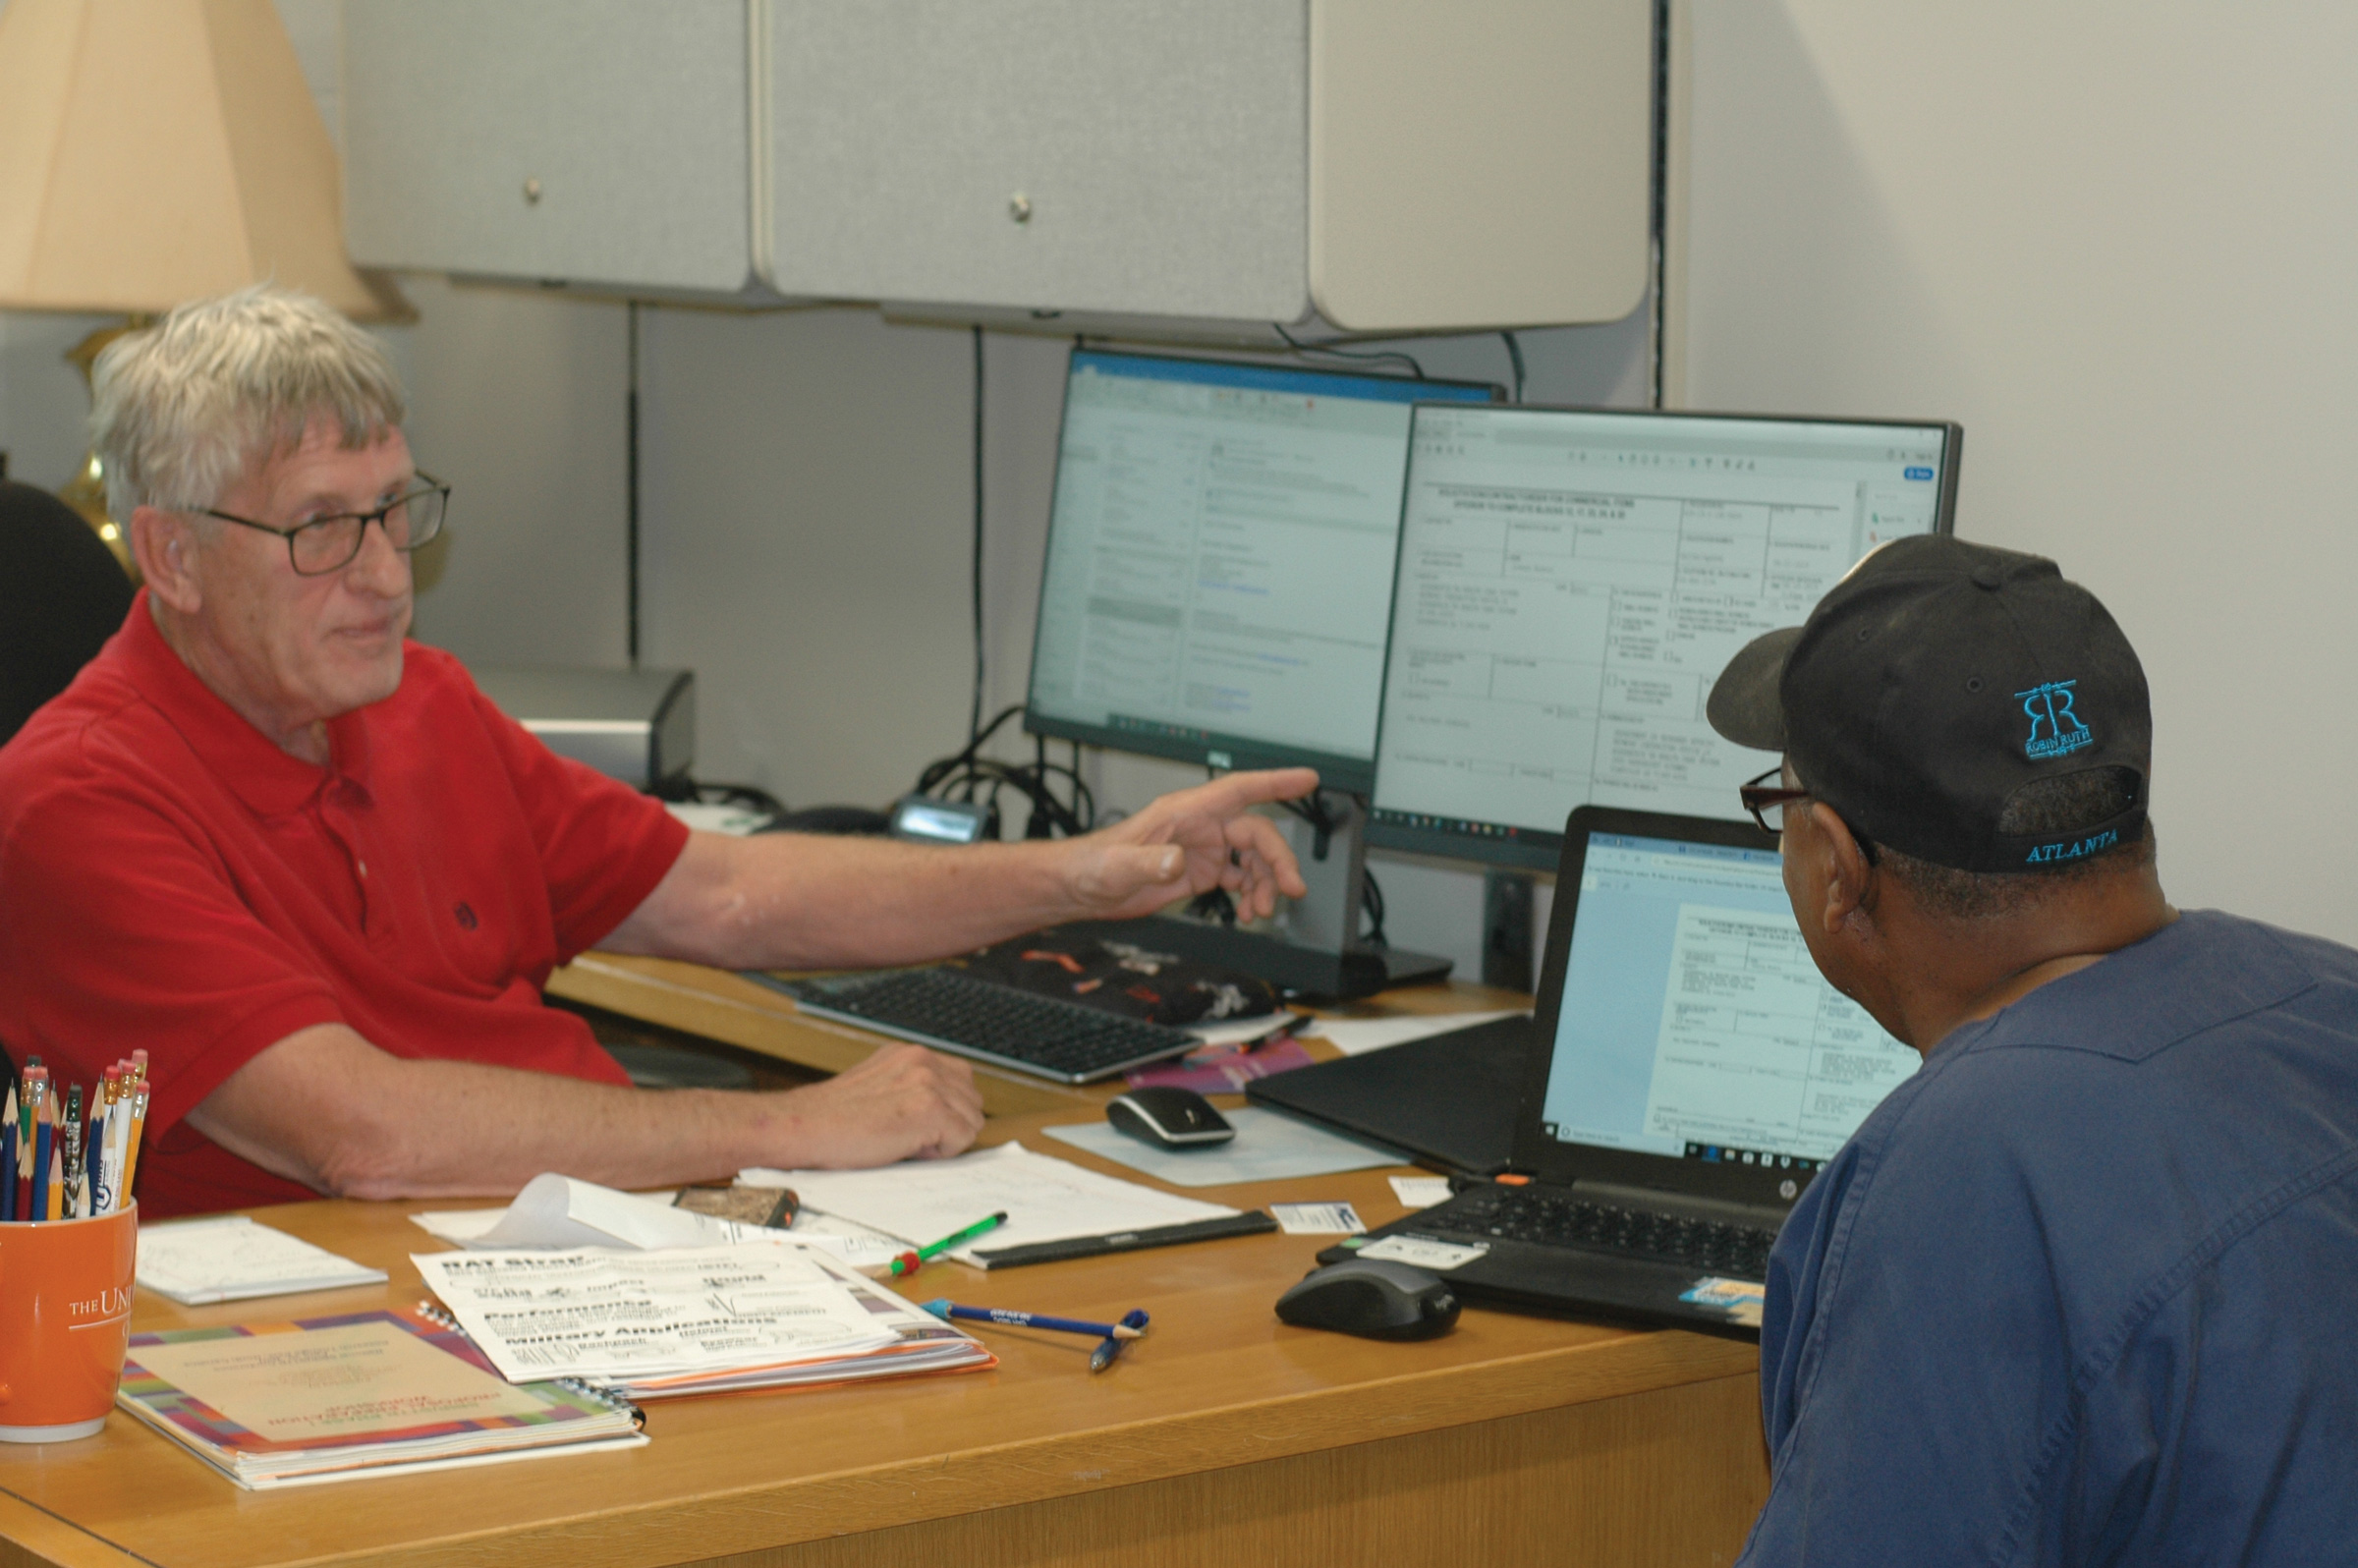 Russell Toone assists a business owner with the government contracting process.